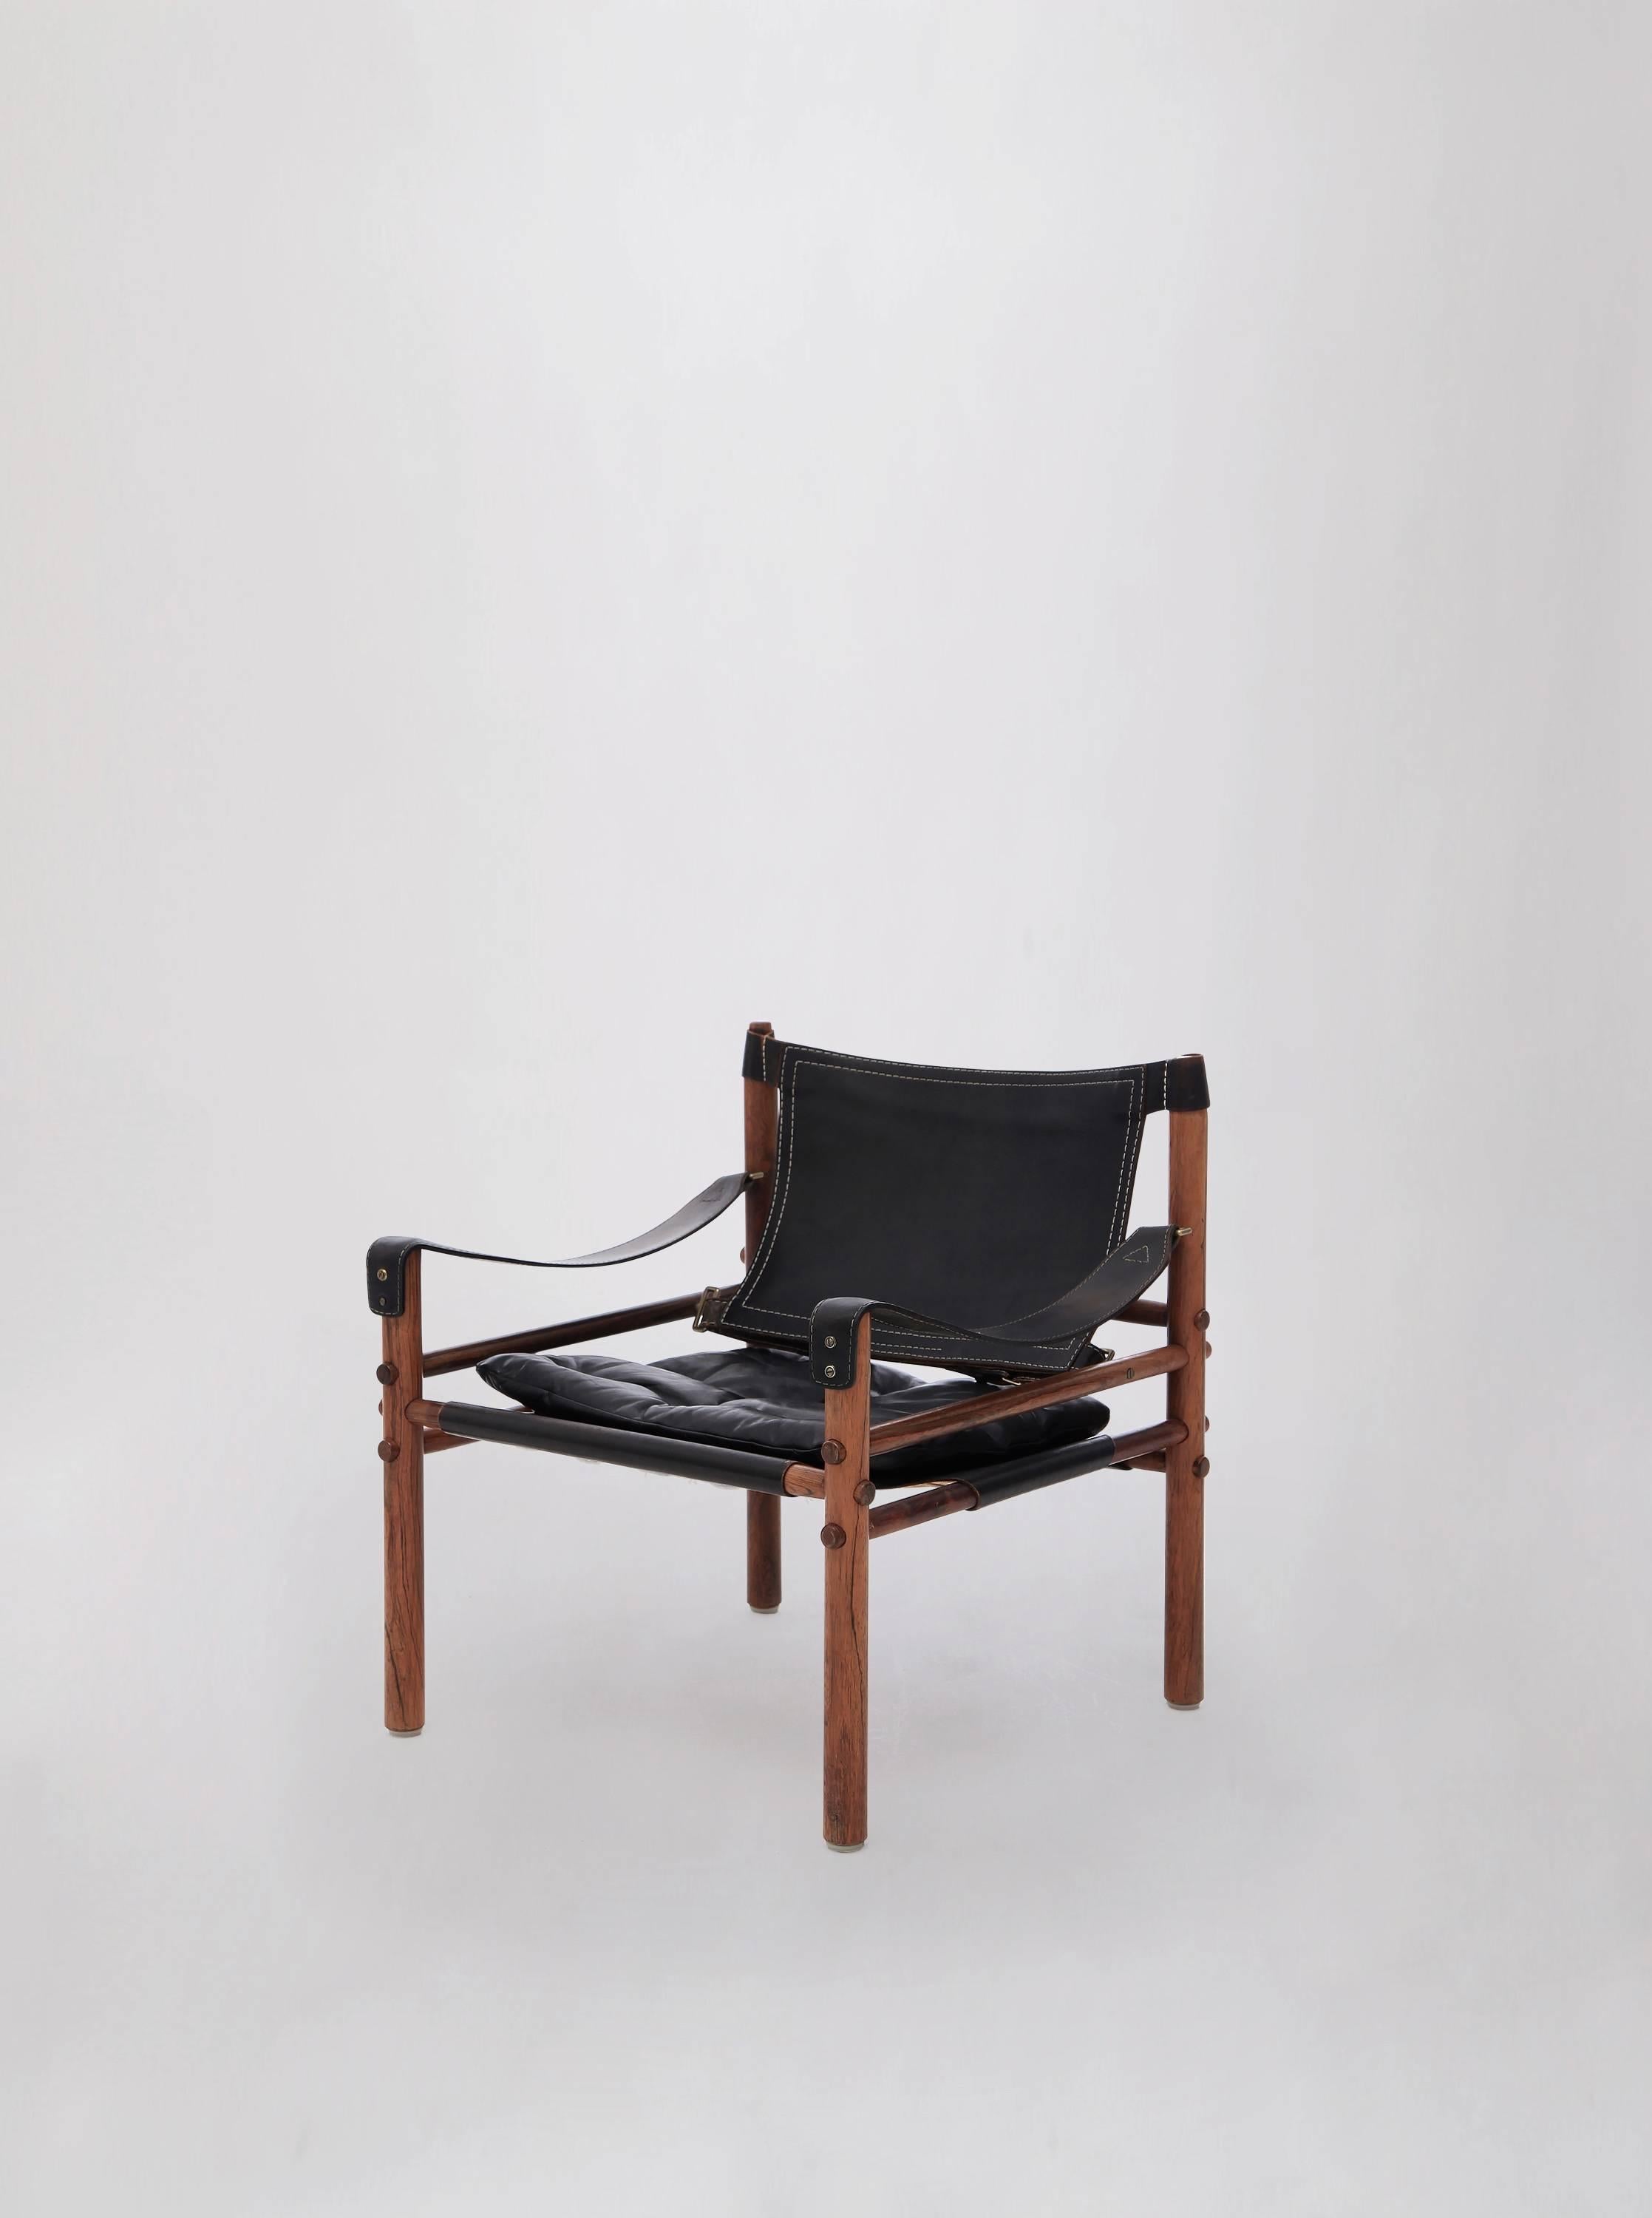 Original Arne Norell Safari (Sirocco) chair in rosewood and black leather in lovely vintage condition.

The chair will be disassembled for shipping but was designed to be taken apart and put together again easily.

Ships worldwide.

Measures: